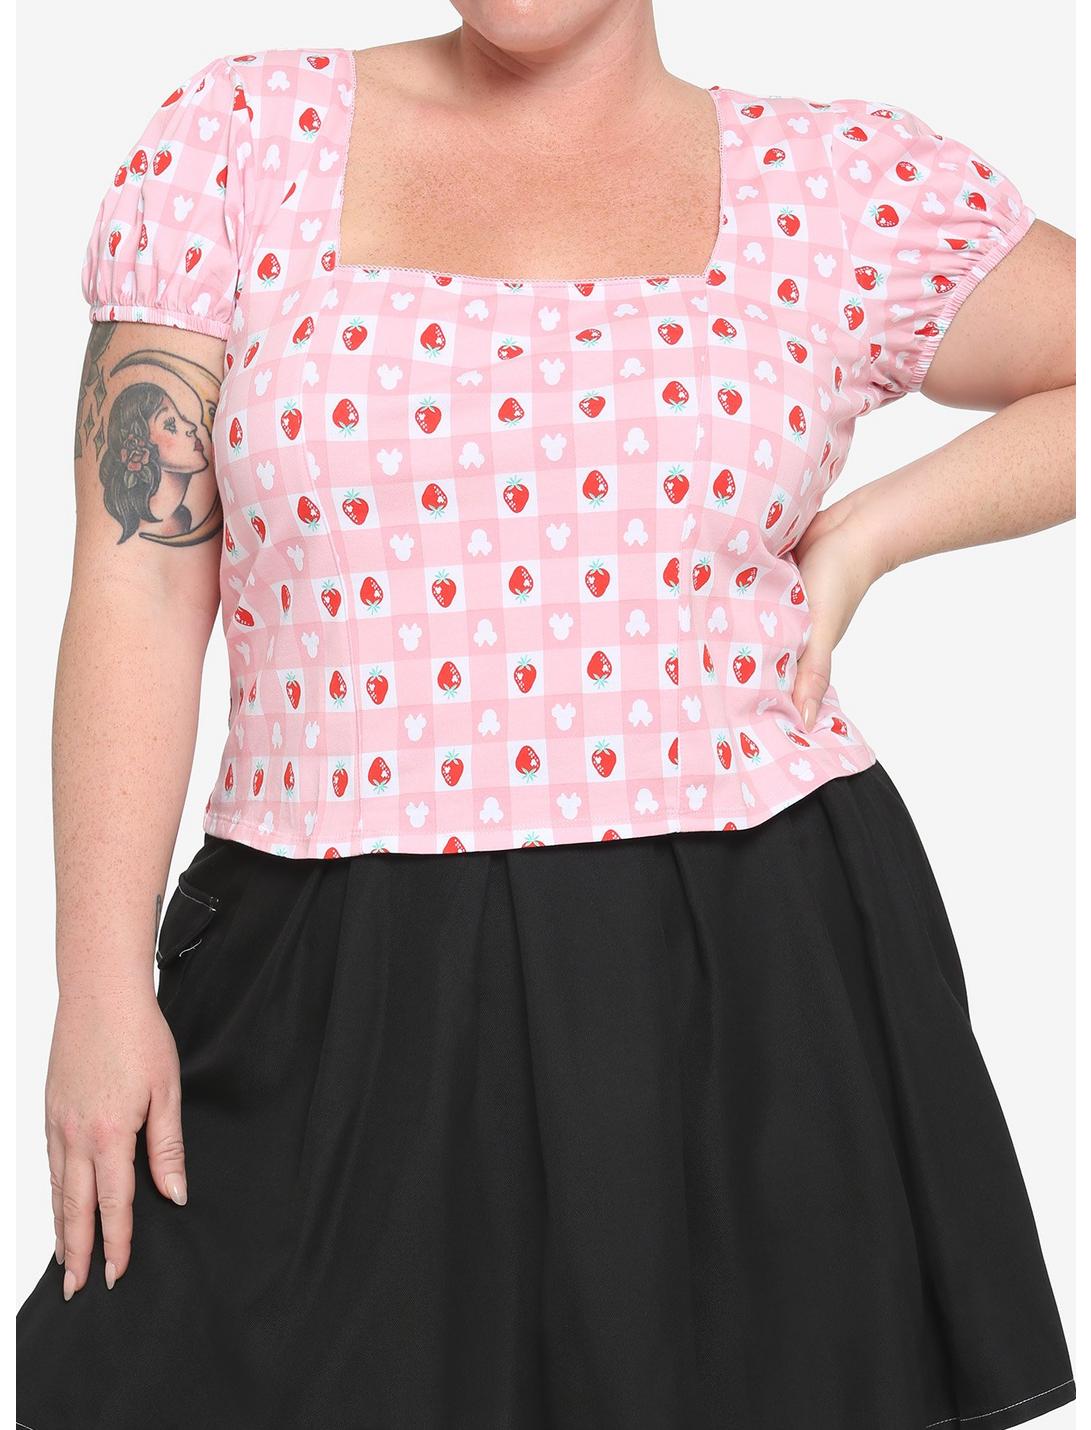 Her Universe Disney Minnie Mouse Strawberry Gingham Girls Top Plus Size, MULTI, hi-res